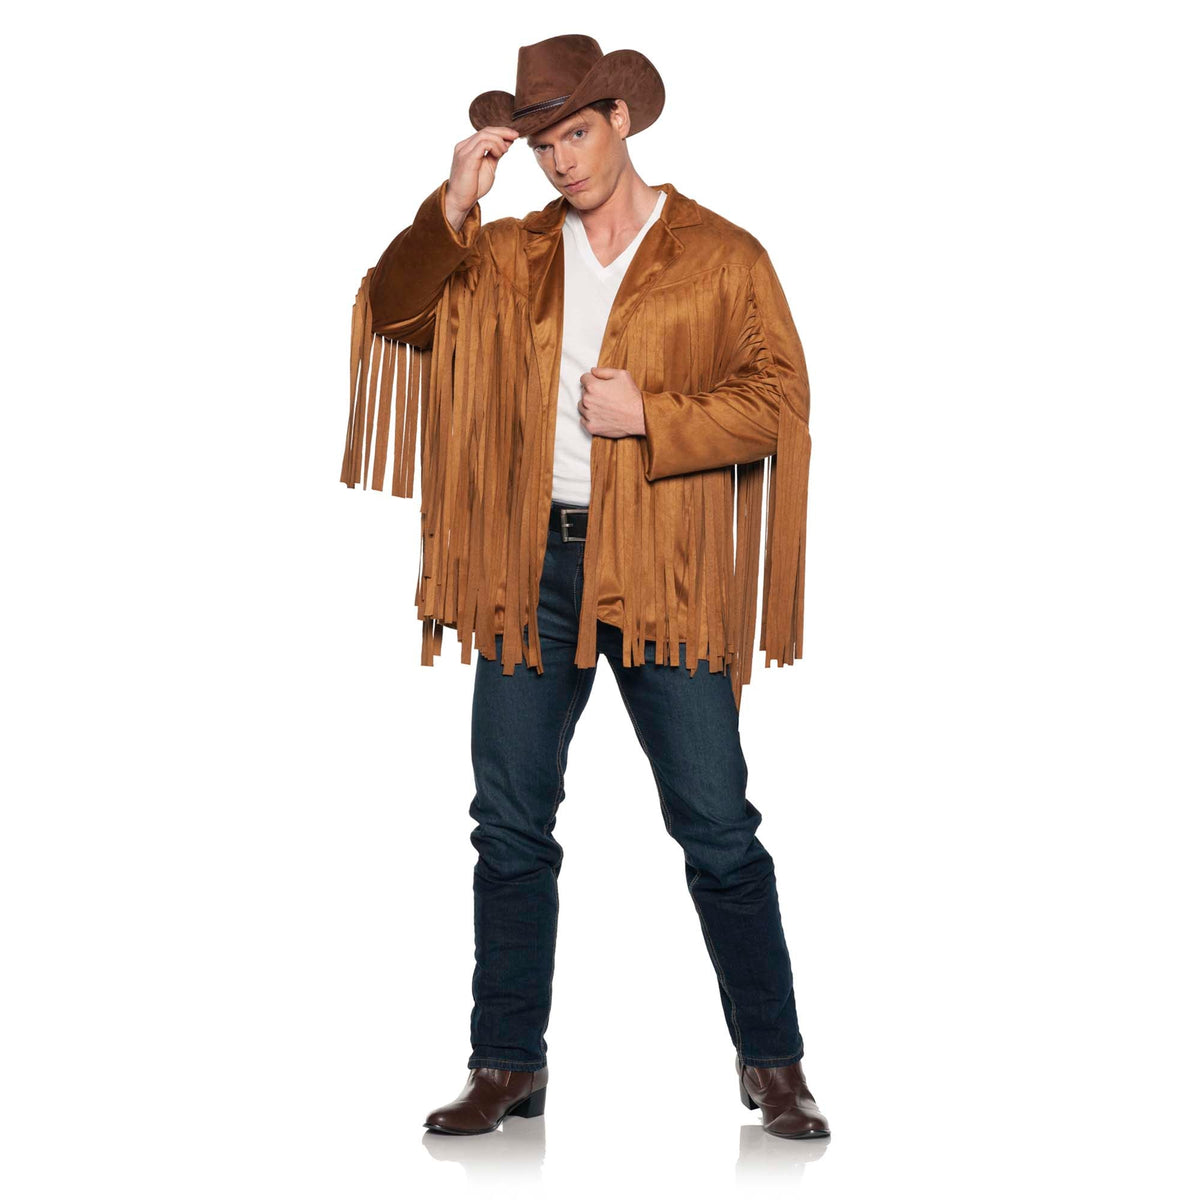 UNDERWRAPS Costume Accessories Western Fringed Jacket for Adults